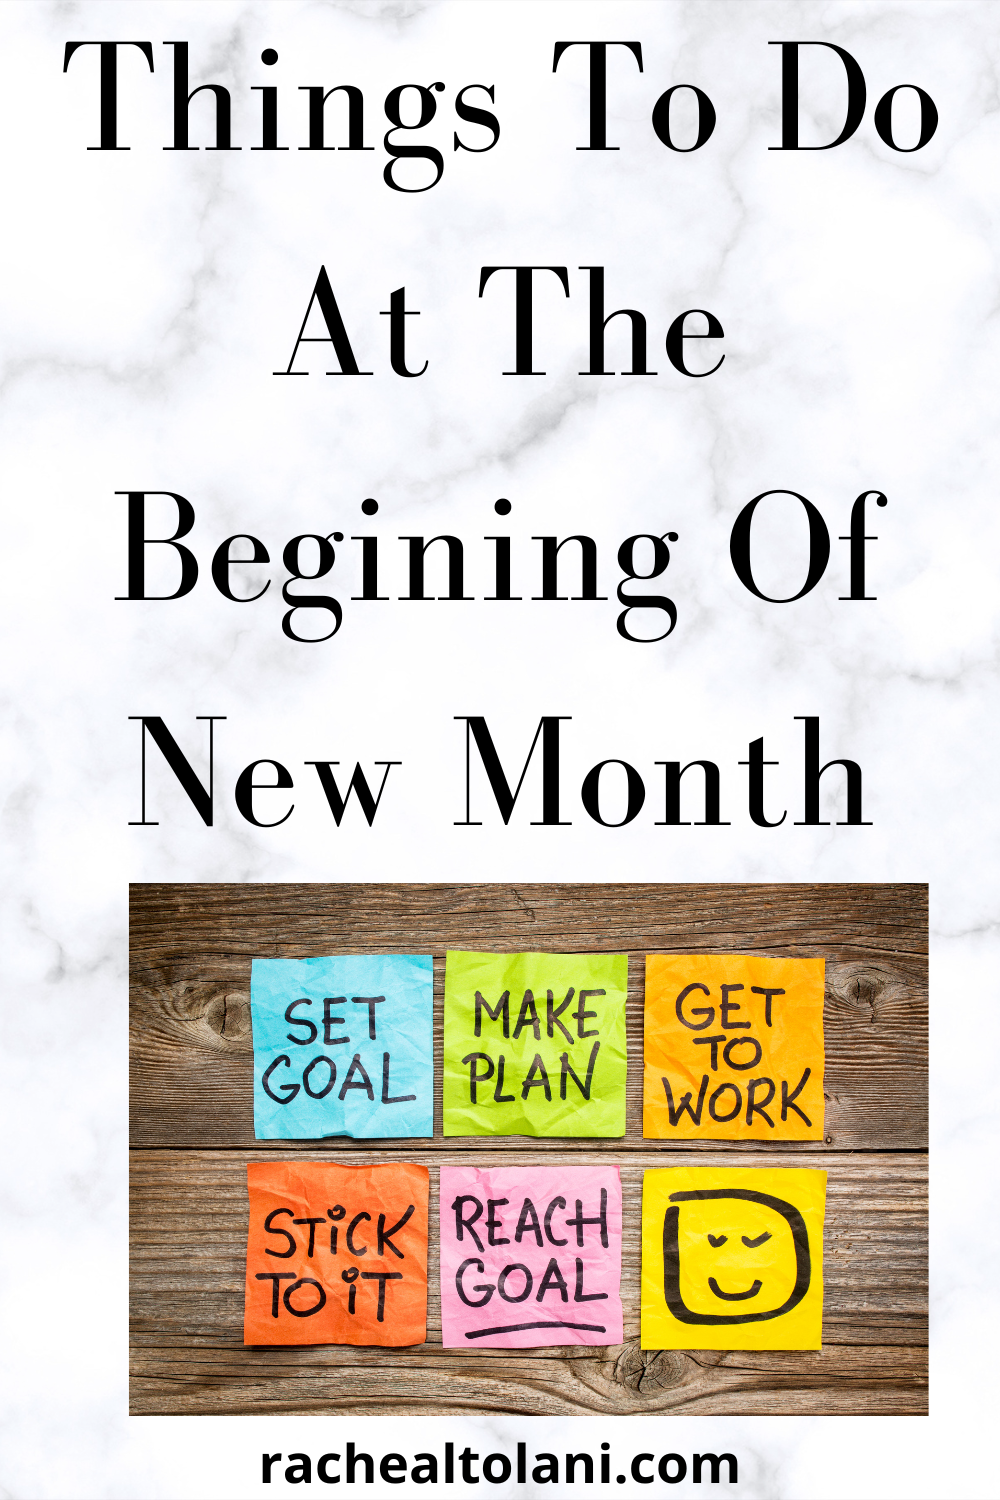 Things To Do At The Beginning Of New Month